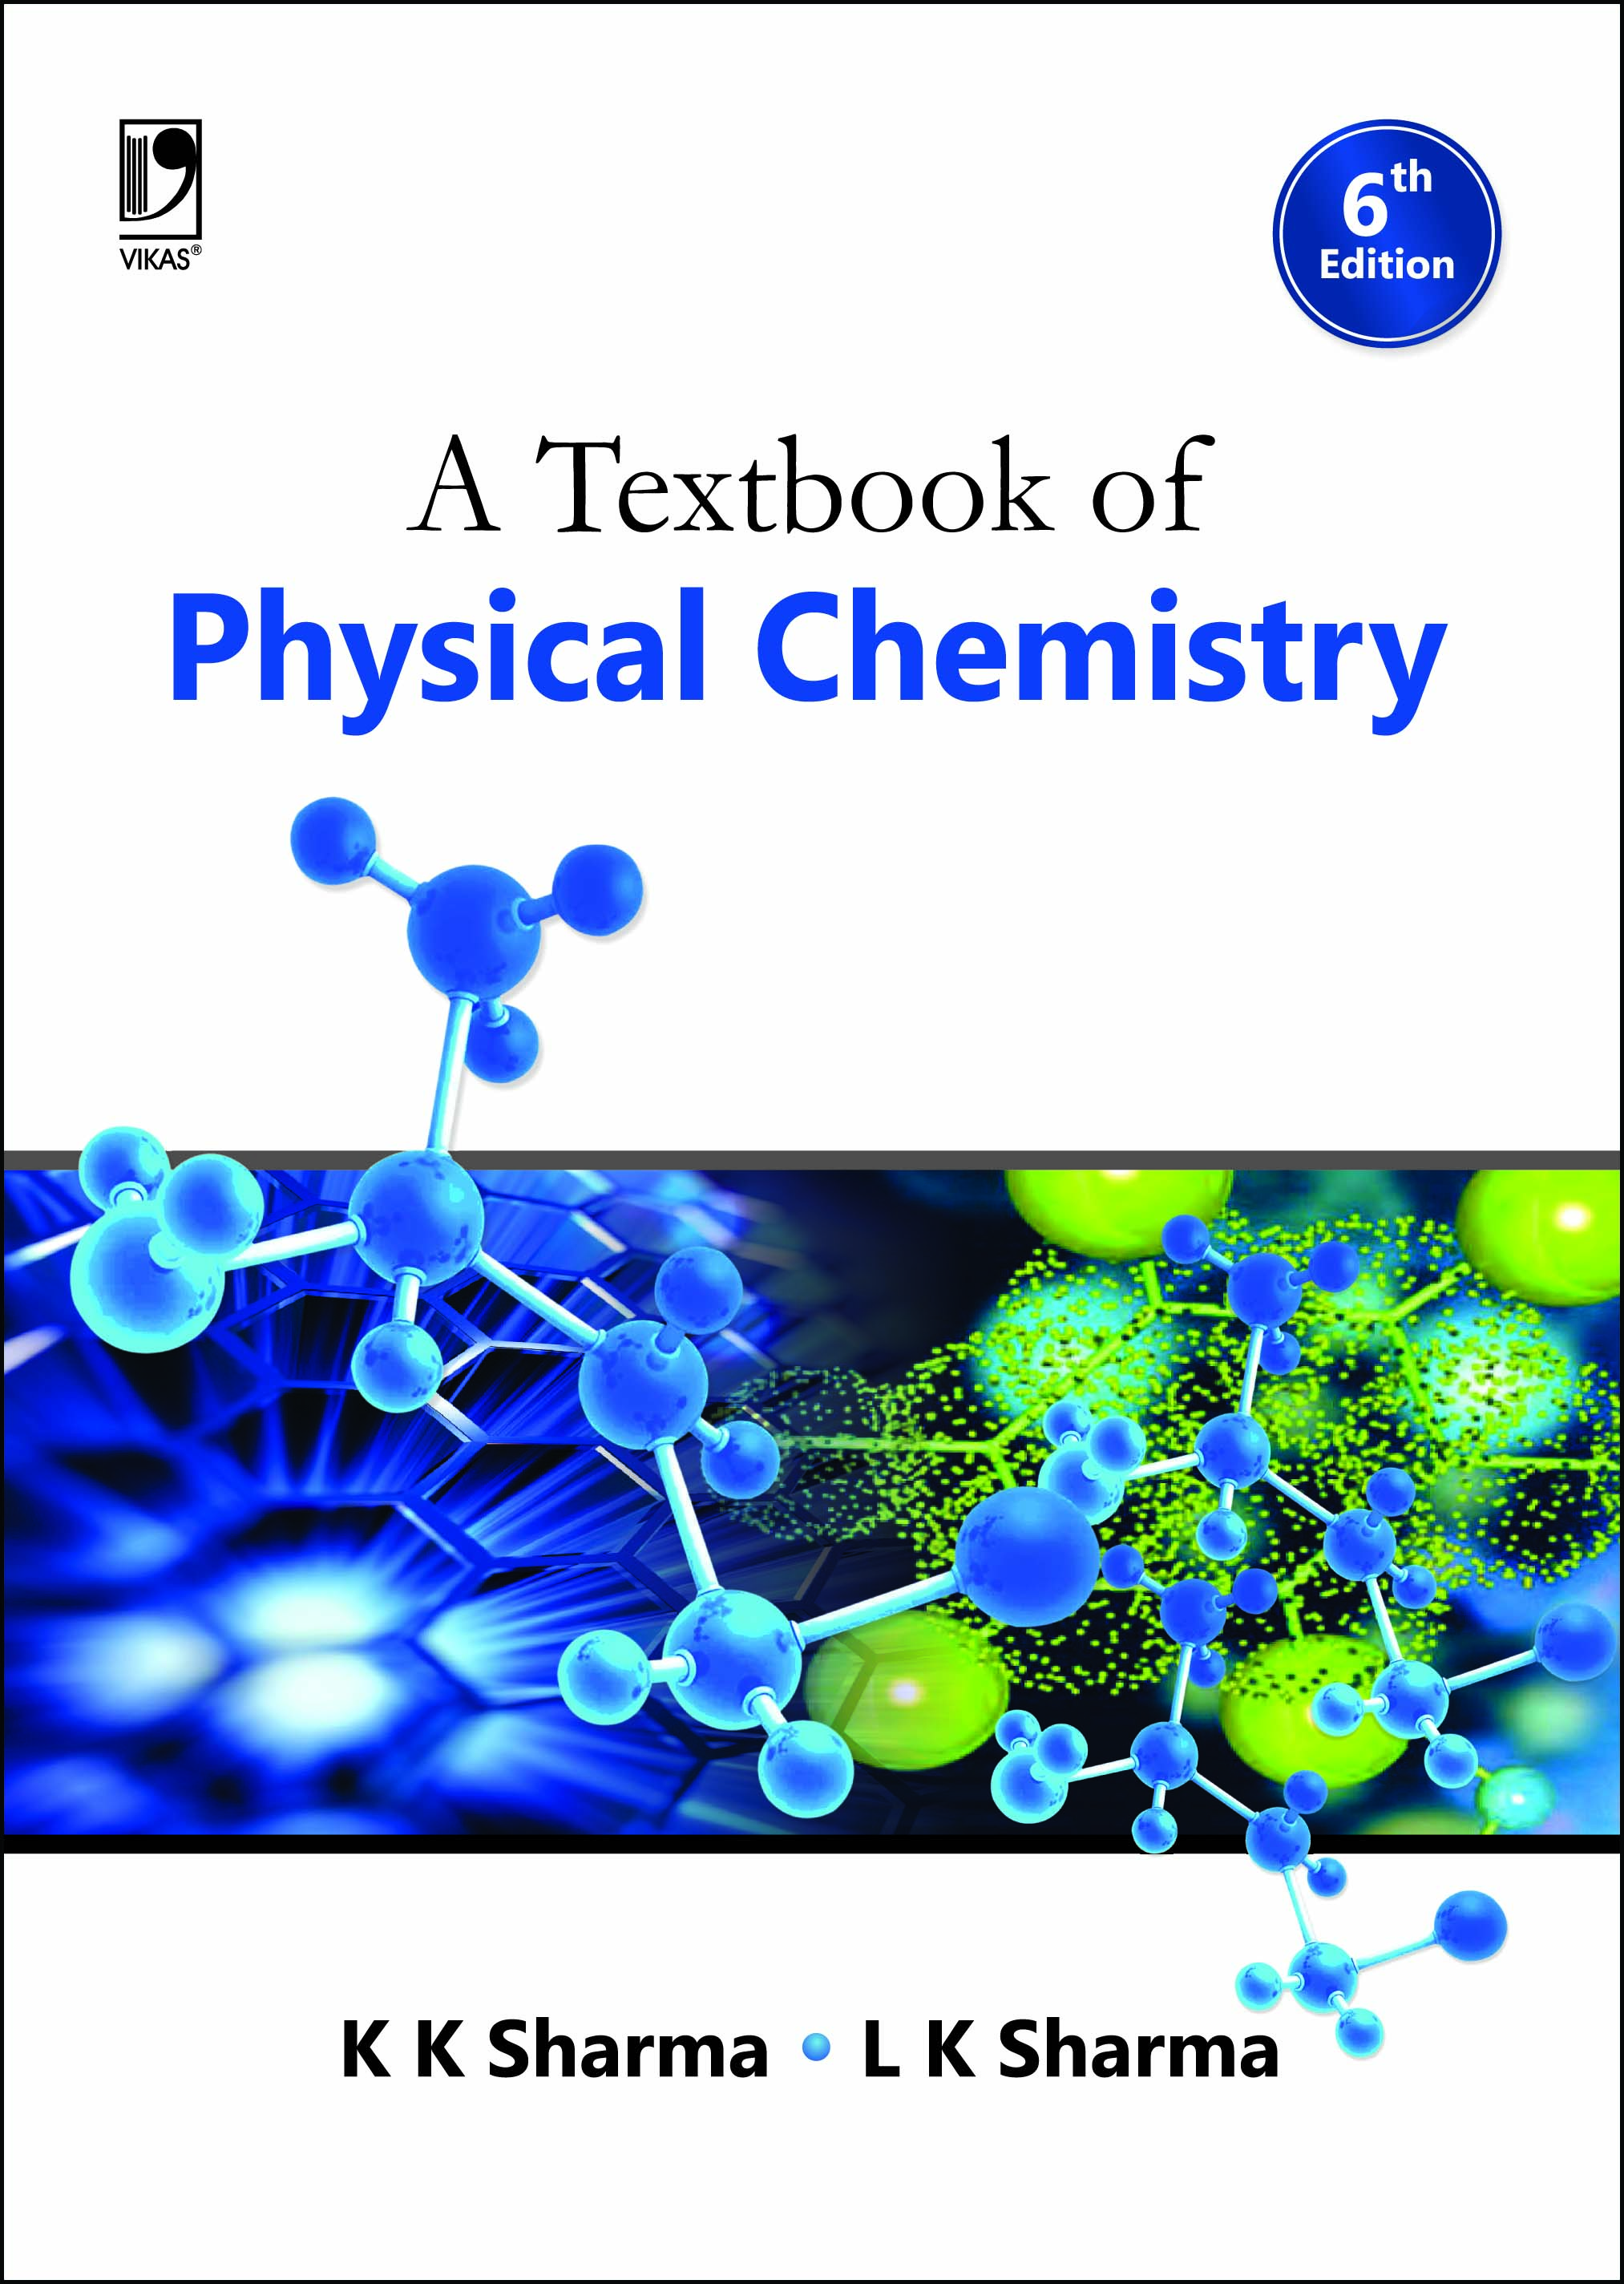 A TEXTBOOK OF PHYSICAL CHEMISTRY